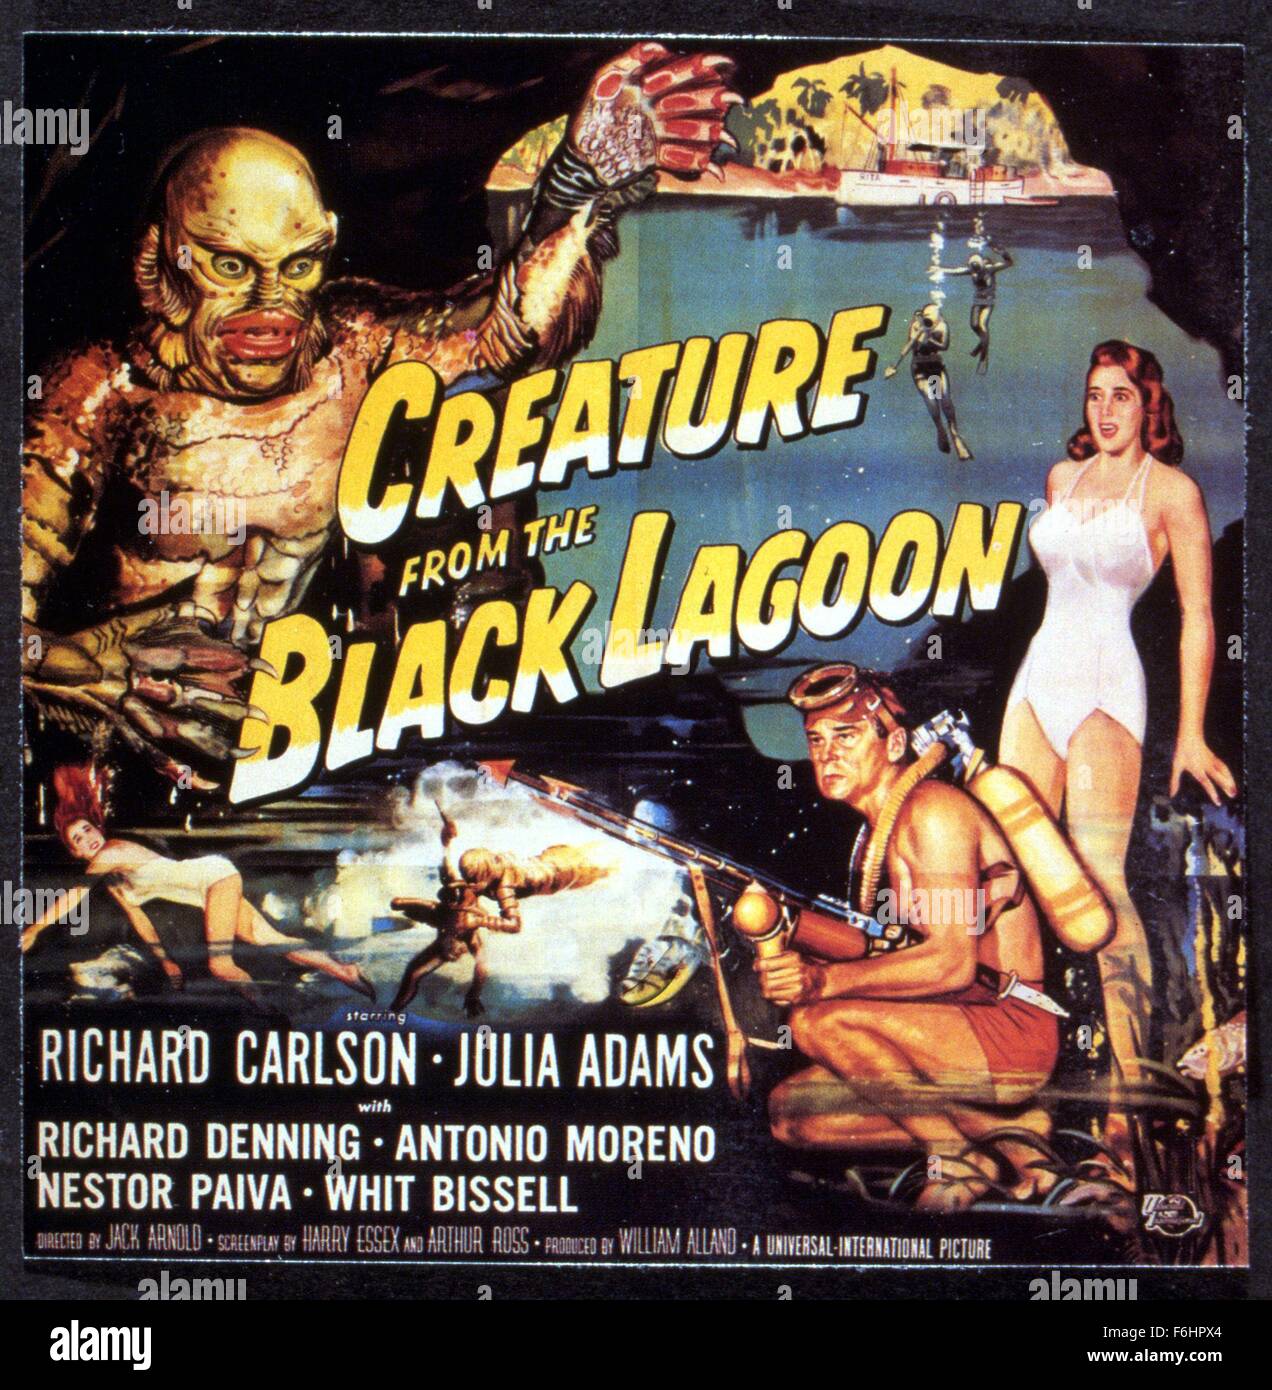 1954, Film Title: CREATURE FROM THE BLACK LAGOON, Director: JACK ARNOLD, Studio: UNIVERSAL, Pictured: MONSTER, SWIMSUIT, 1954, JACK ARNOLD, ITS & ALIENS! THINGS, POSTER ART. (Credit Image: SNAP) Stock Photo